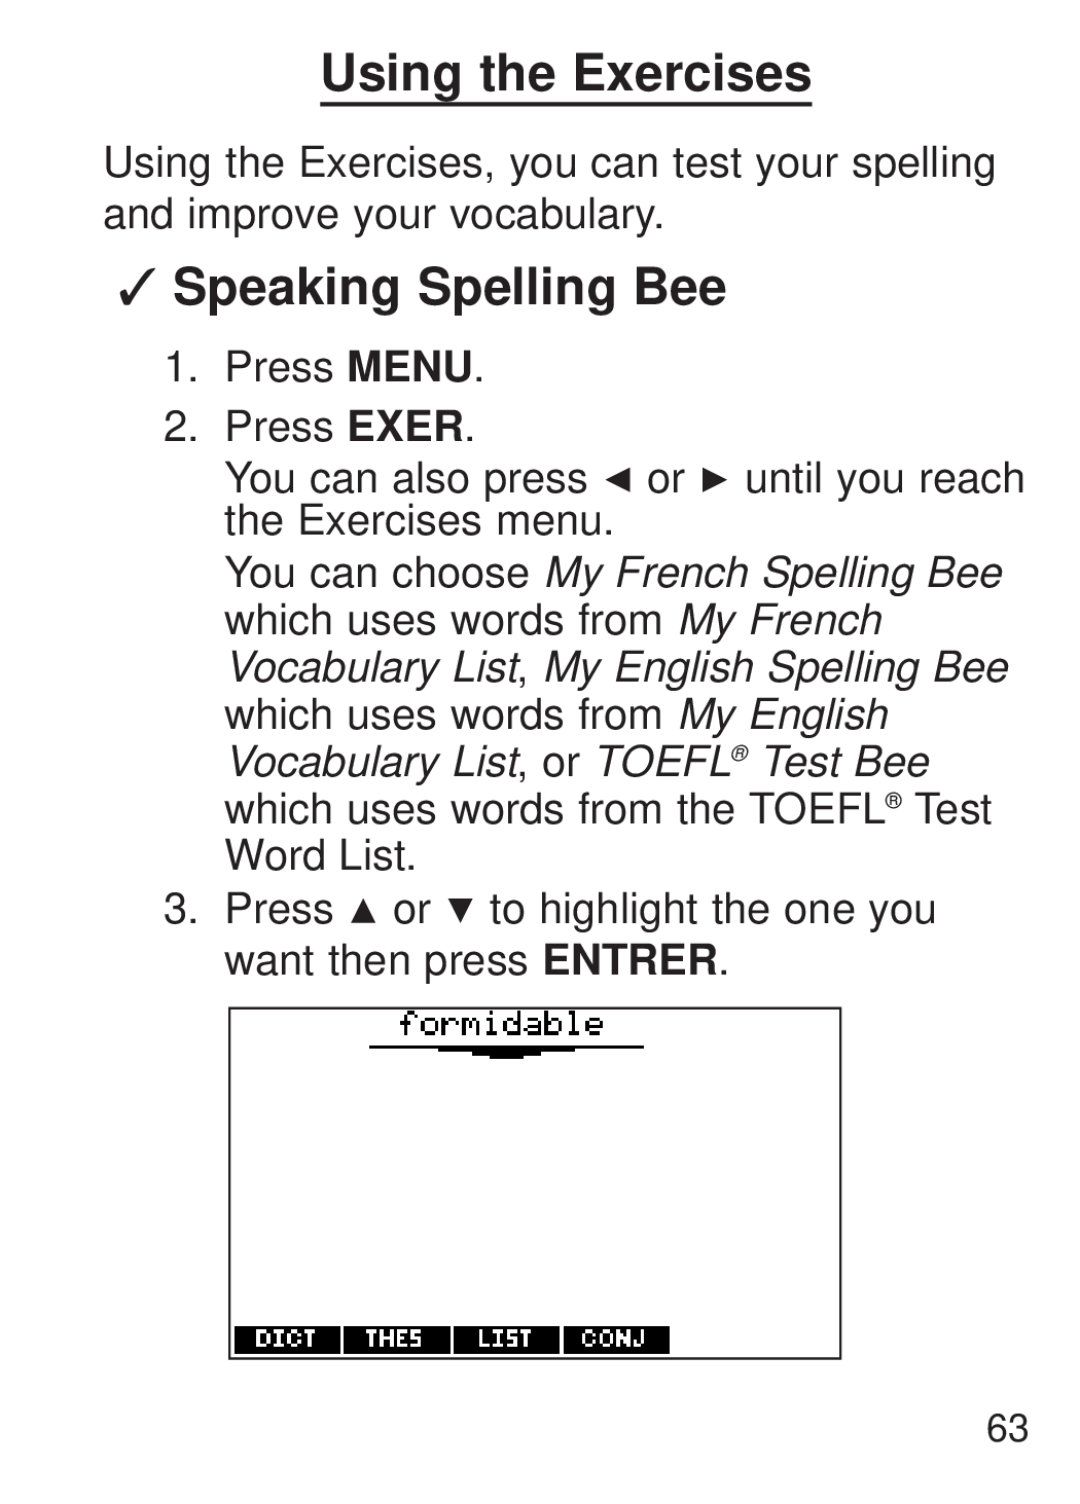 Franklin FQS-1870 manual Using the Exercises, Speaking Spelling Bee 